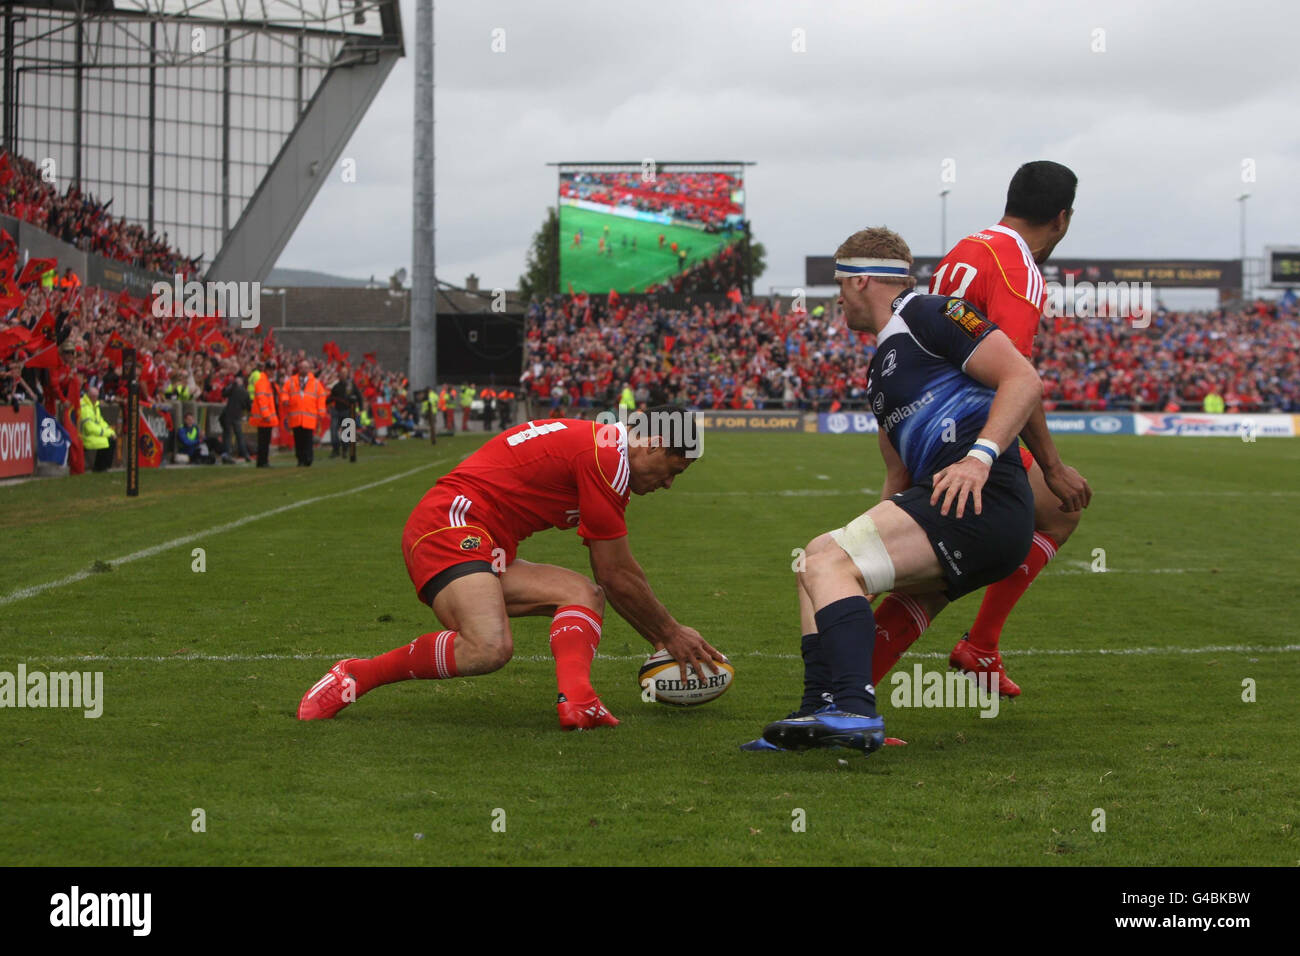 Munster's Dug Howlet scorers a try during the Magners League Final at Thomond Park Stadium, Limerick, Ireland. Stock Photo